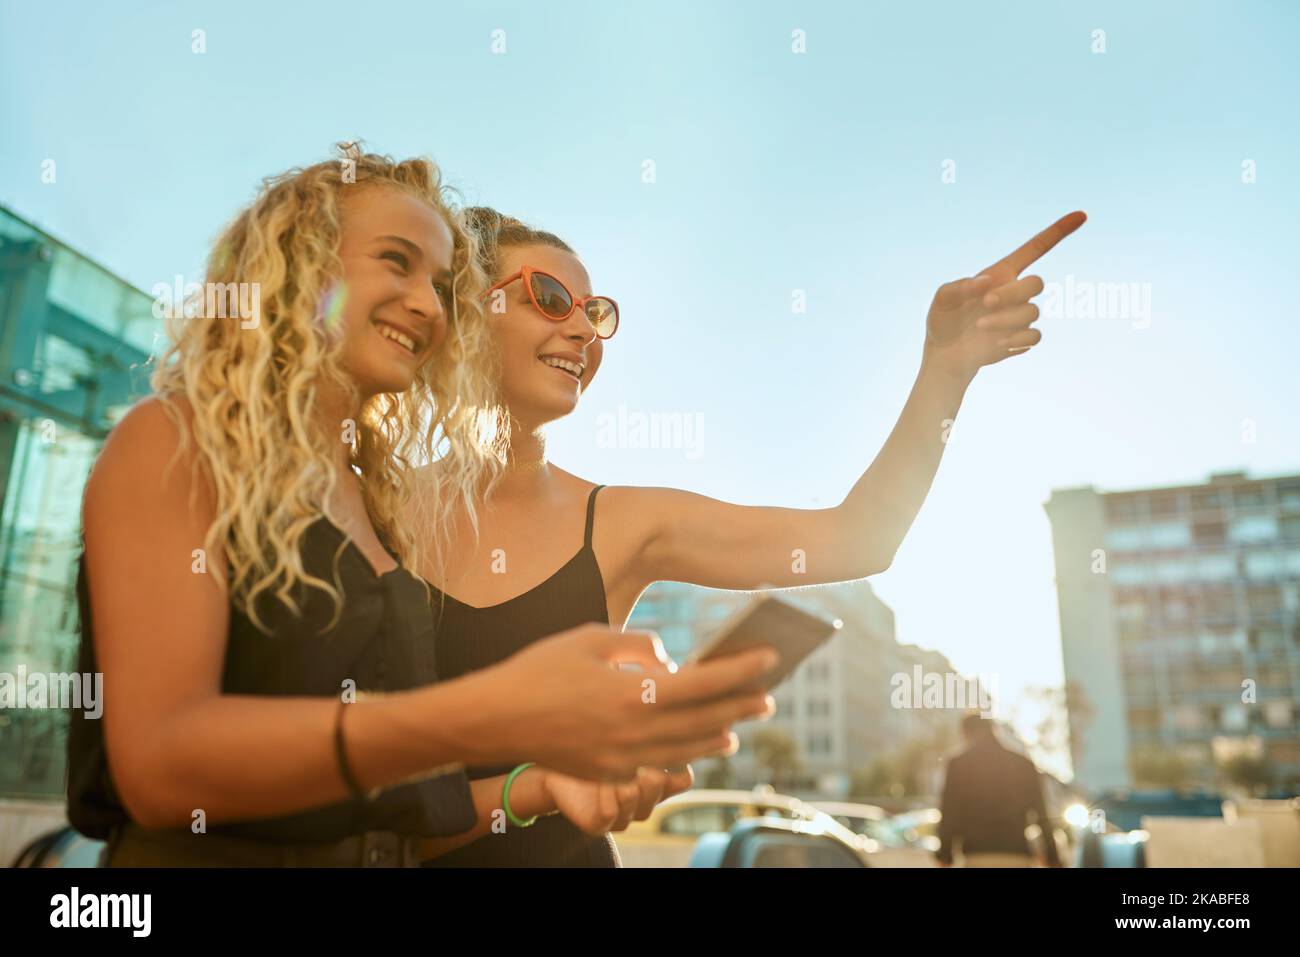 That way. two attractive young women exploring the city sights with the help of a cellphone. Stock Photo